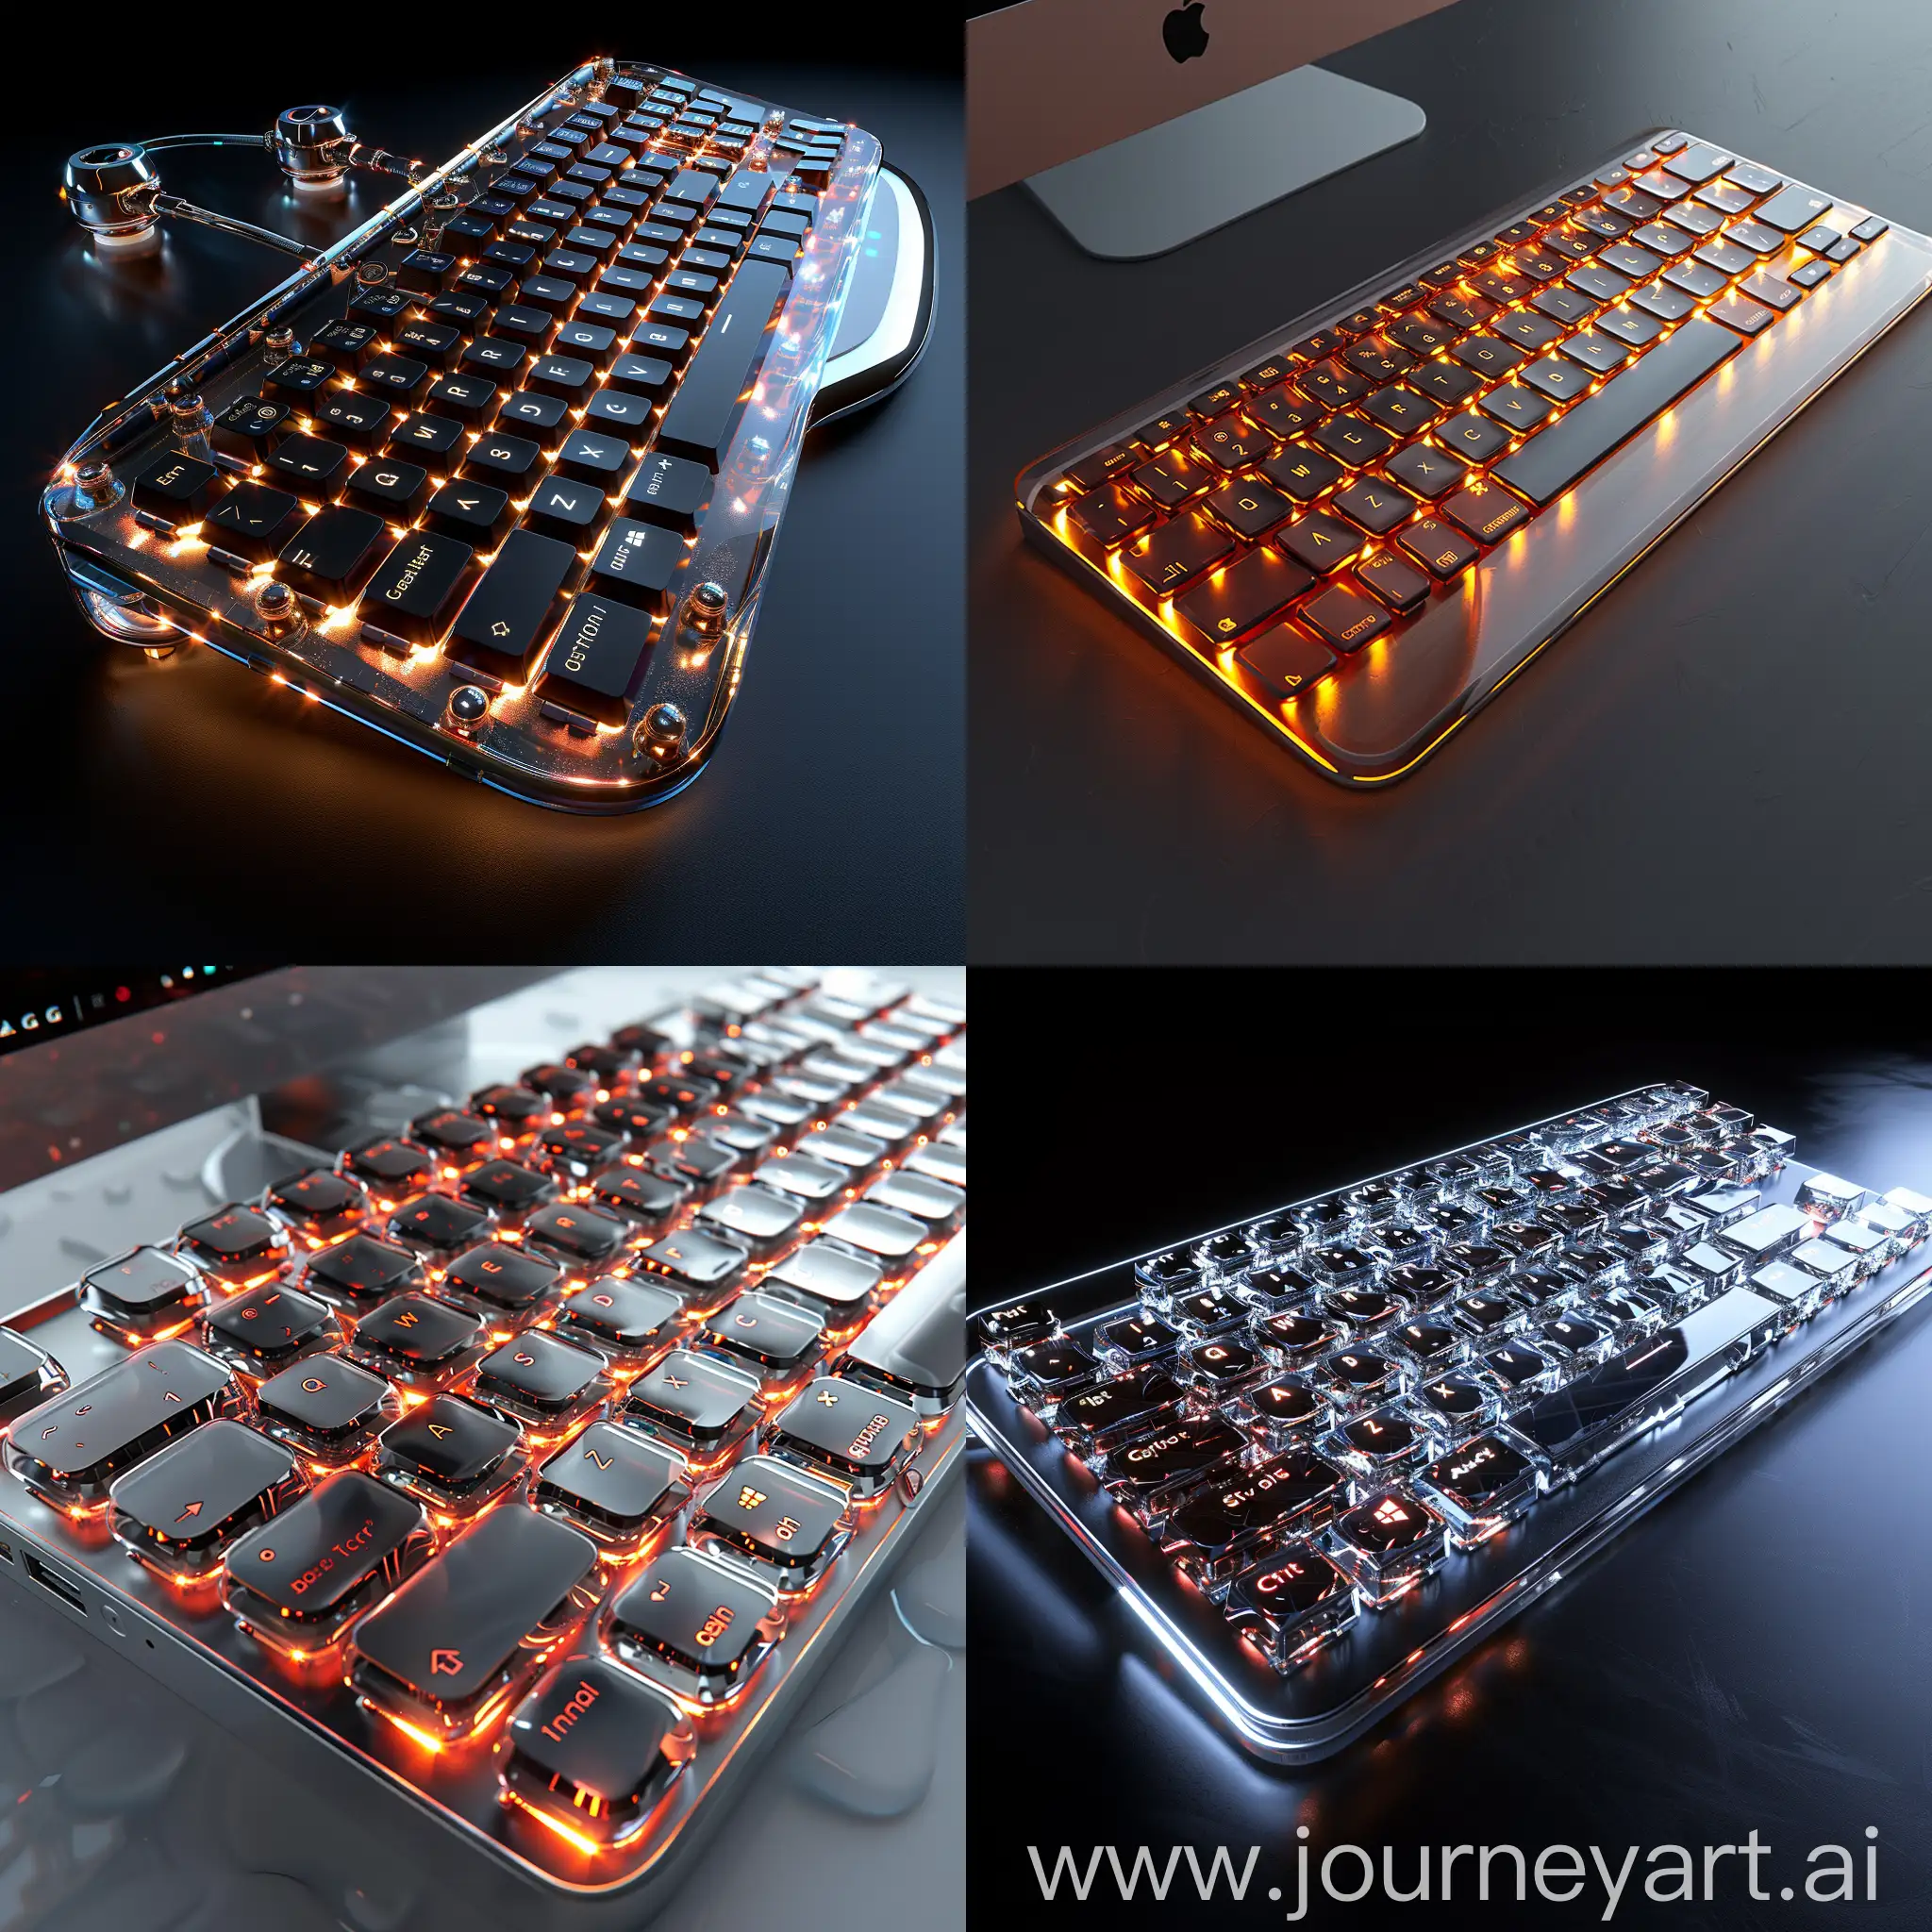 Futuristic-Stainless-Steel-Transparent-Keyboard-with-Smart-Materials